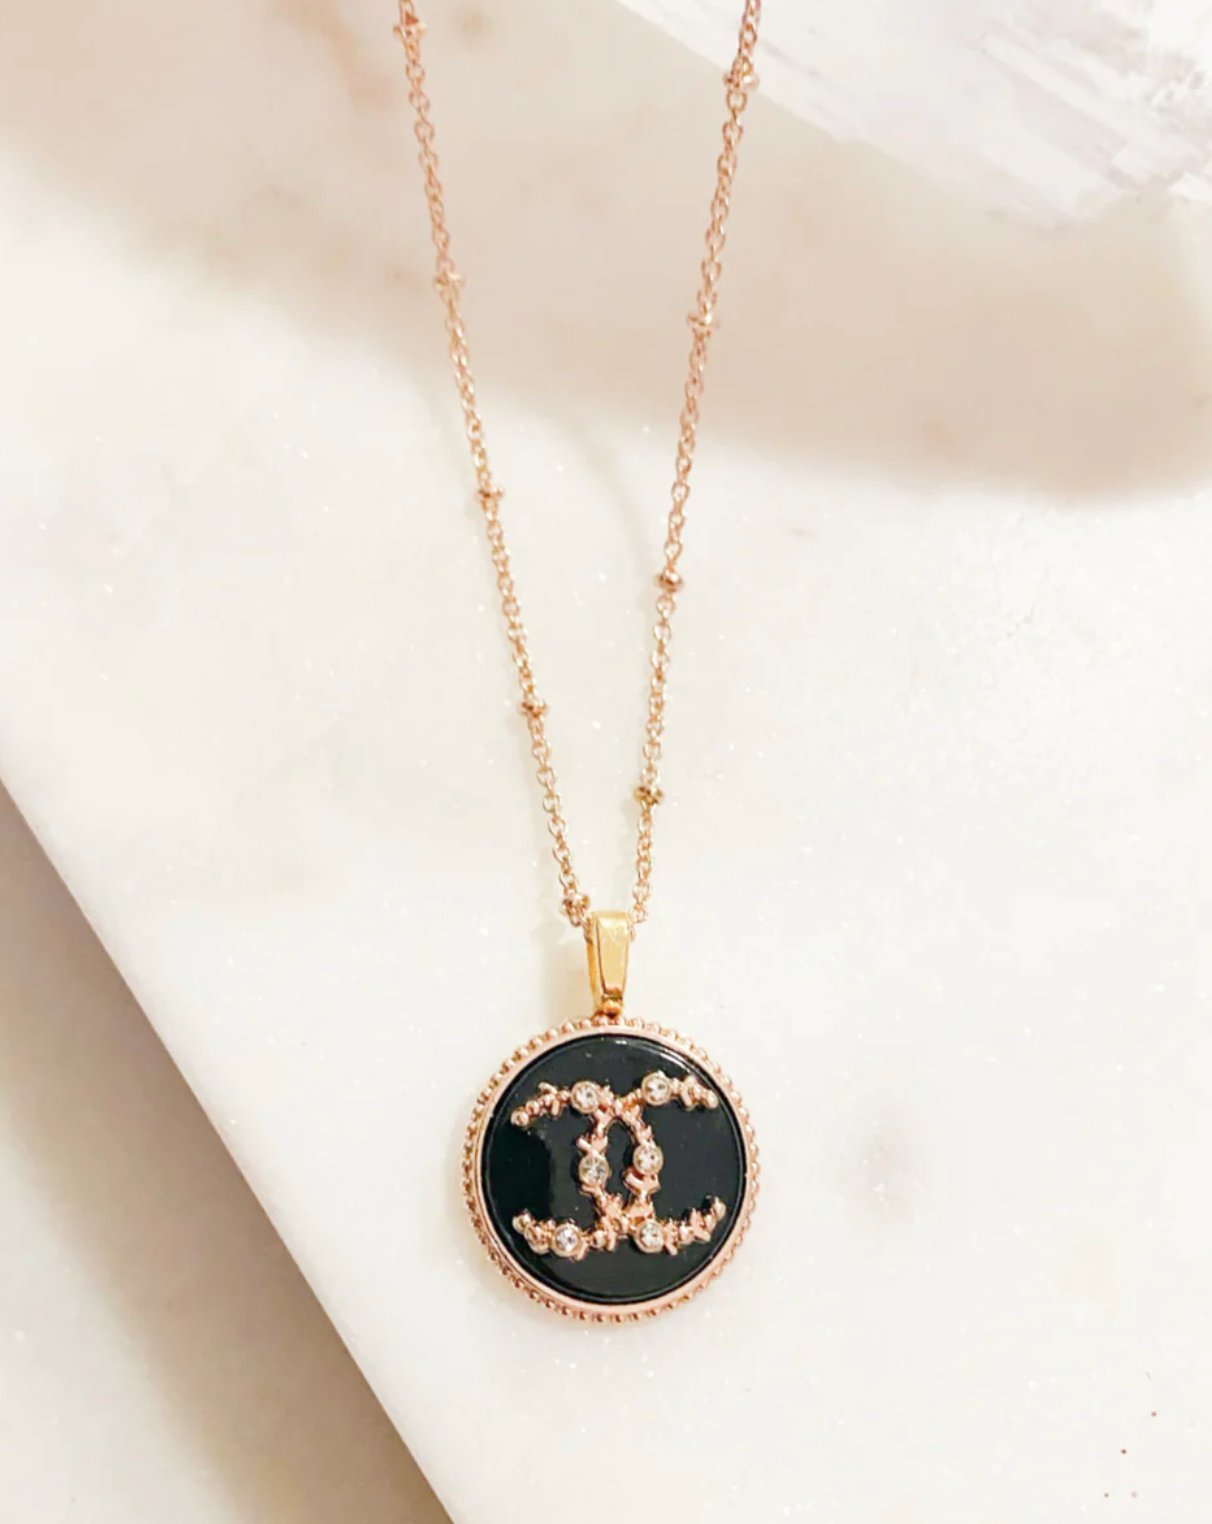 Repurposed Pink and Pearl Heart 'Chanel' Pendant